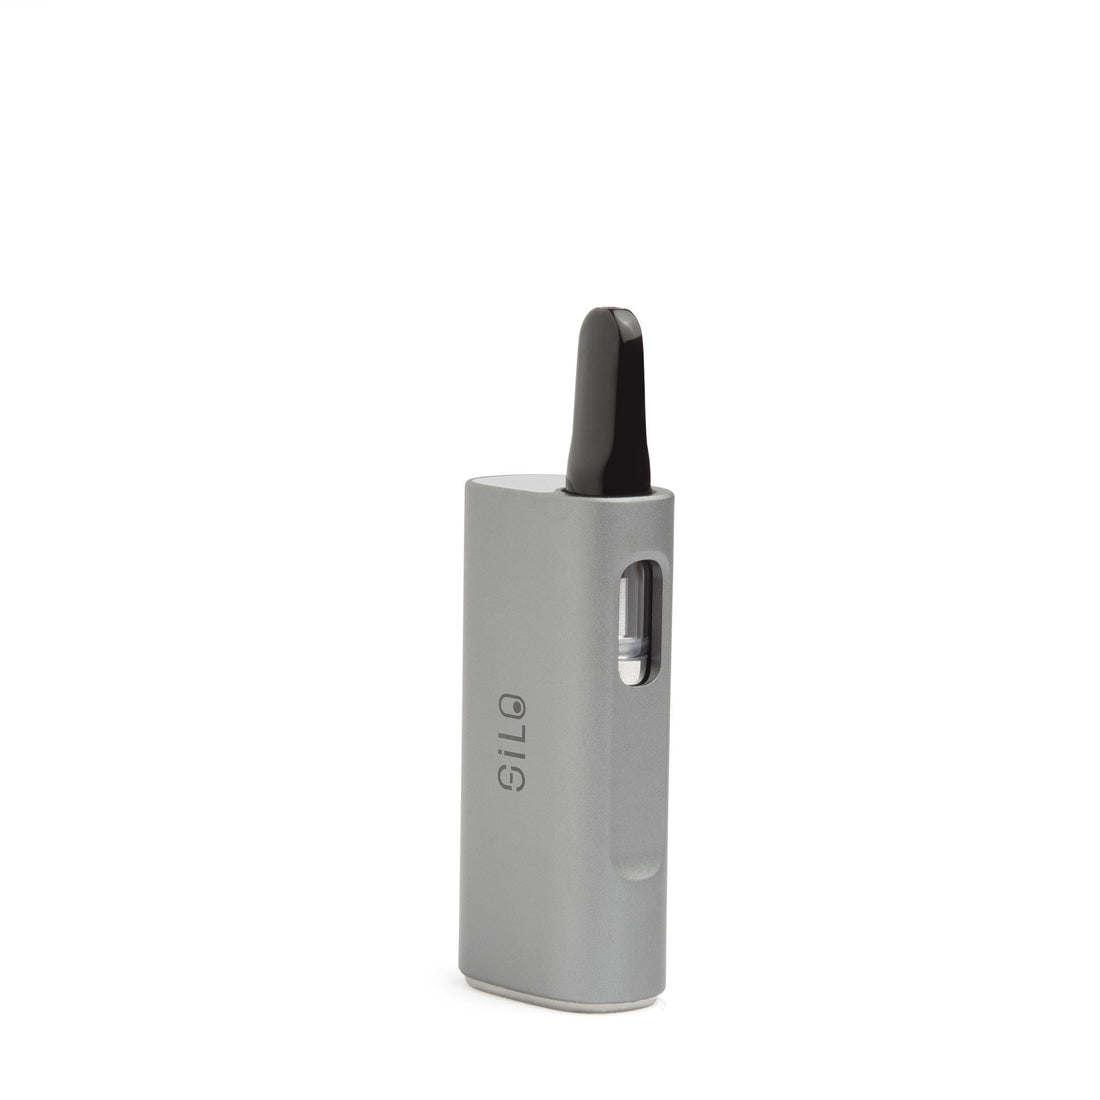 ccell batteries that work cartridges